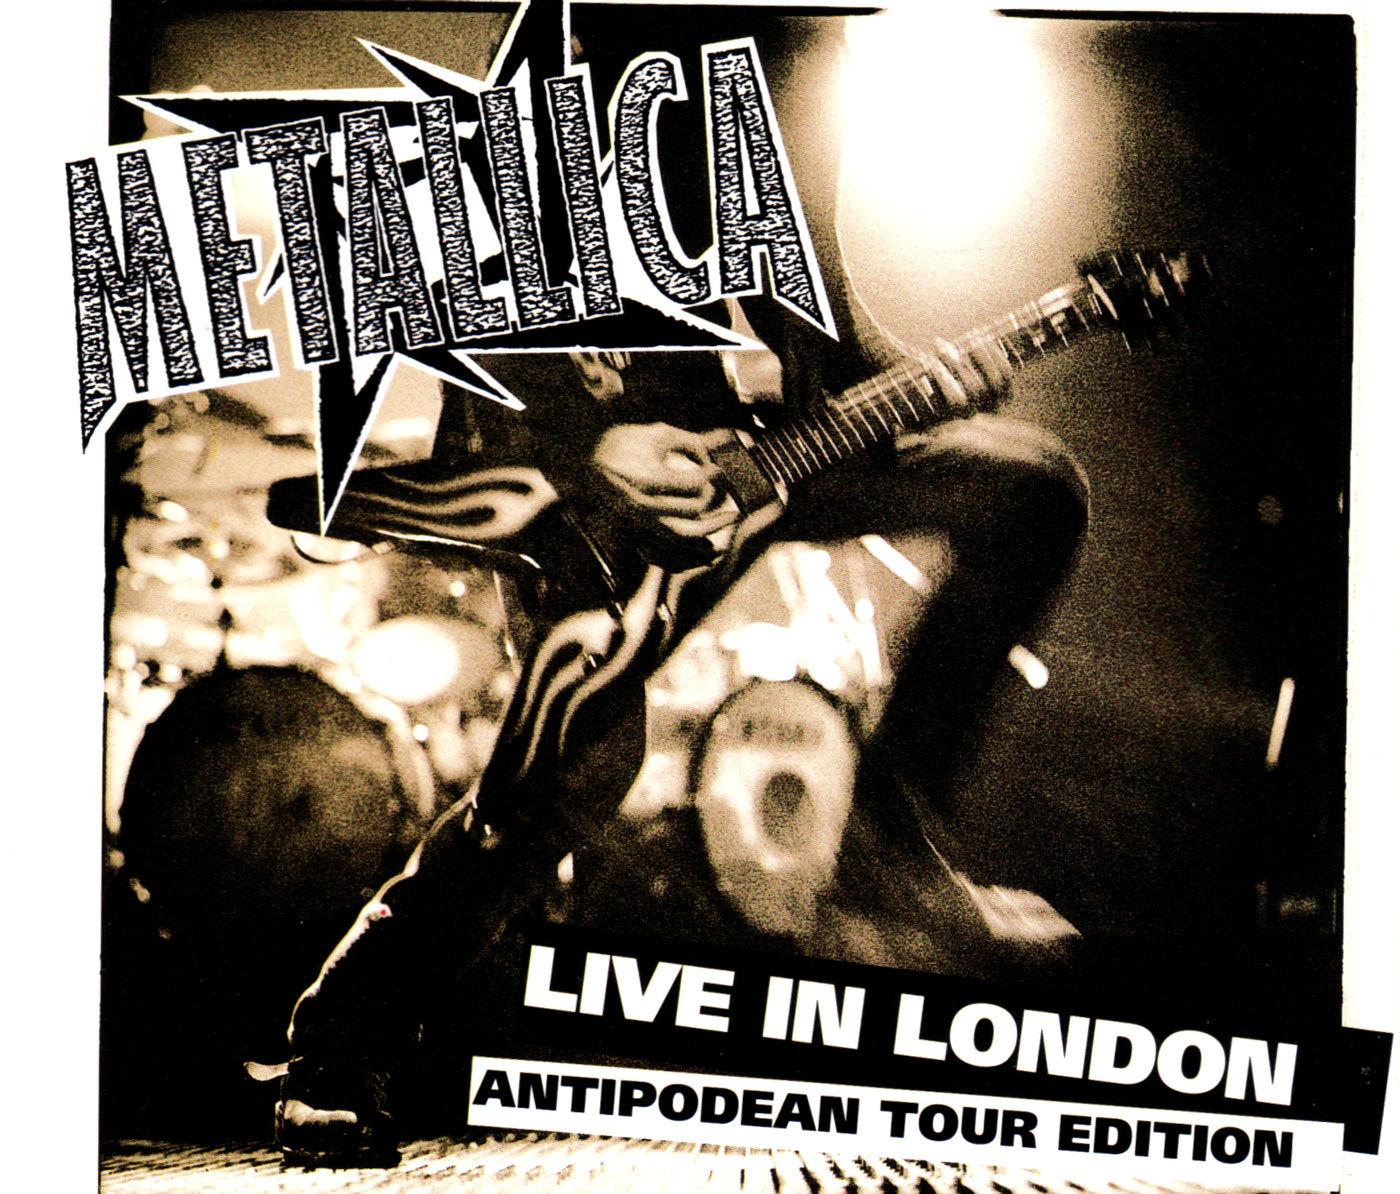 Live In London: The Antipodean Tour Edition Album Cover